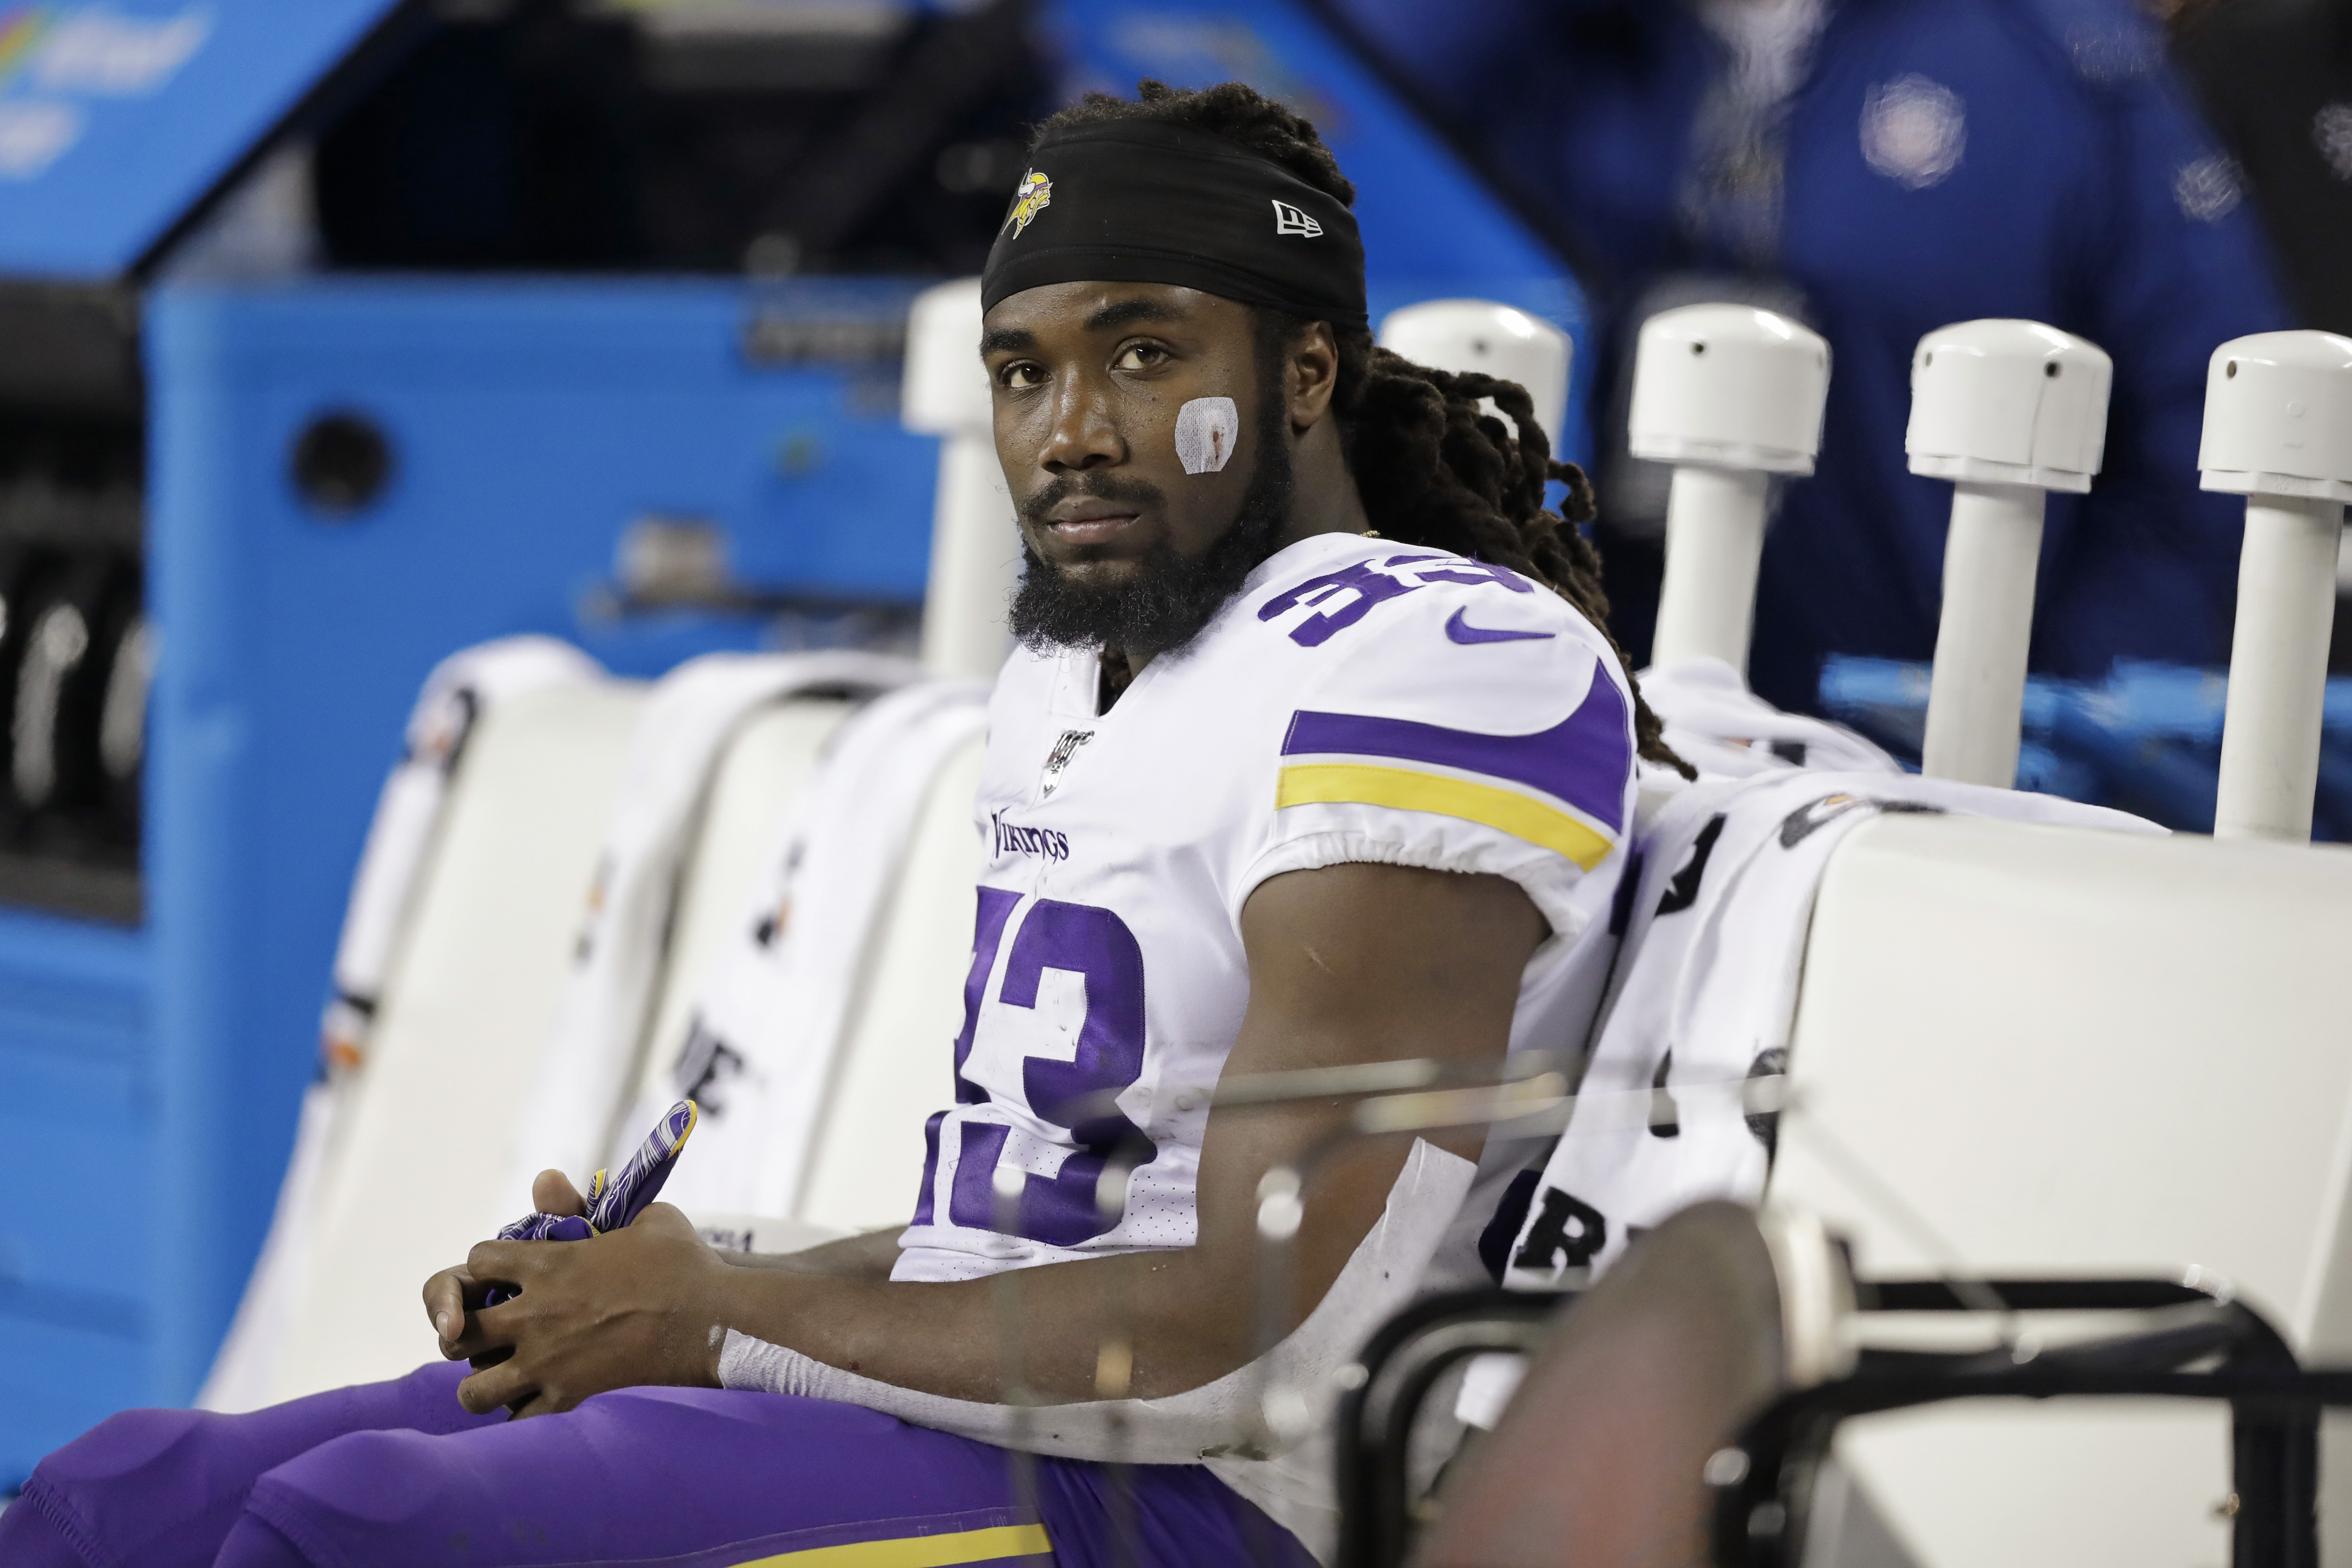 Vikings still on track for playoffs, but questions persist